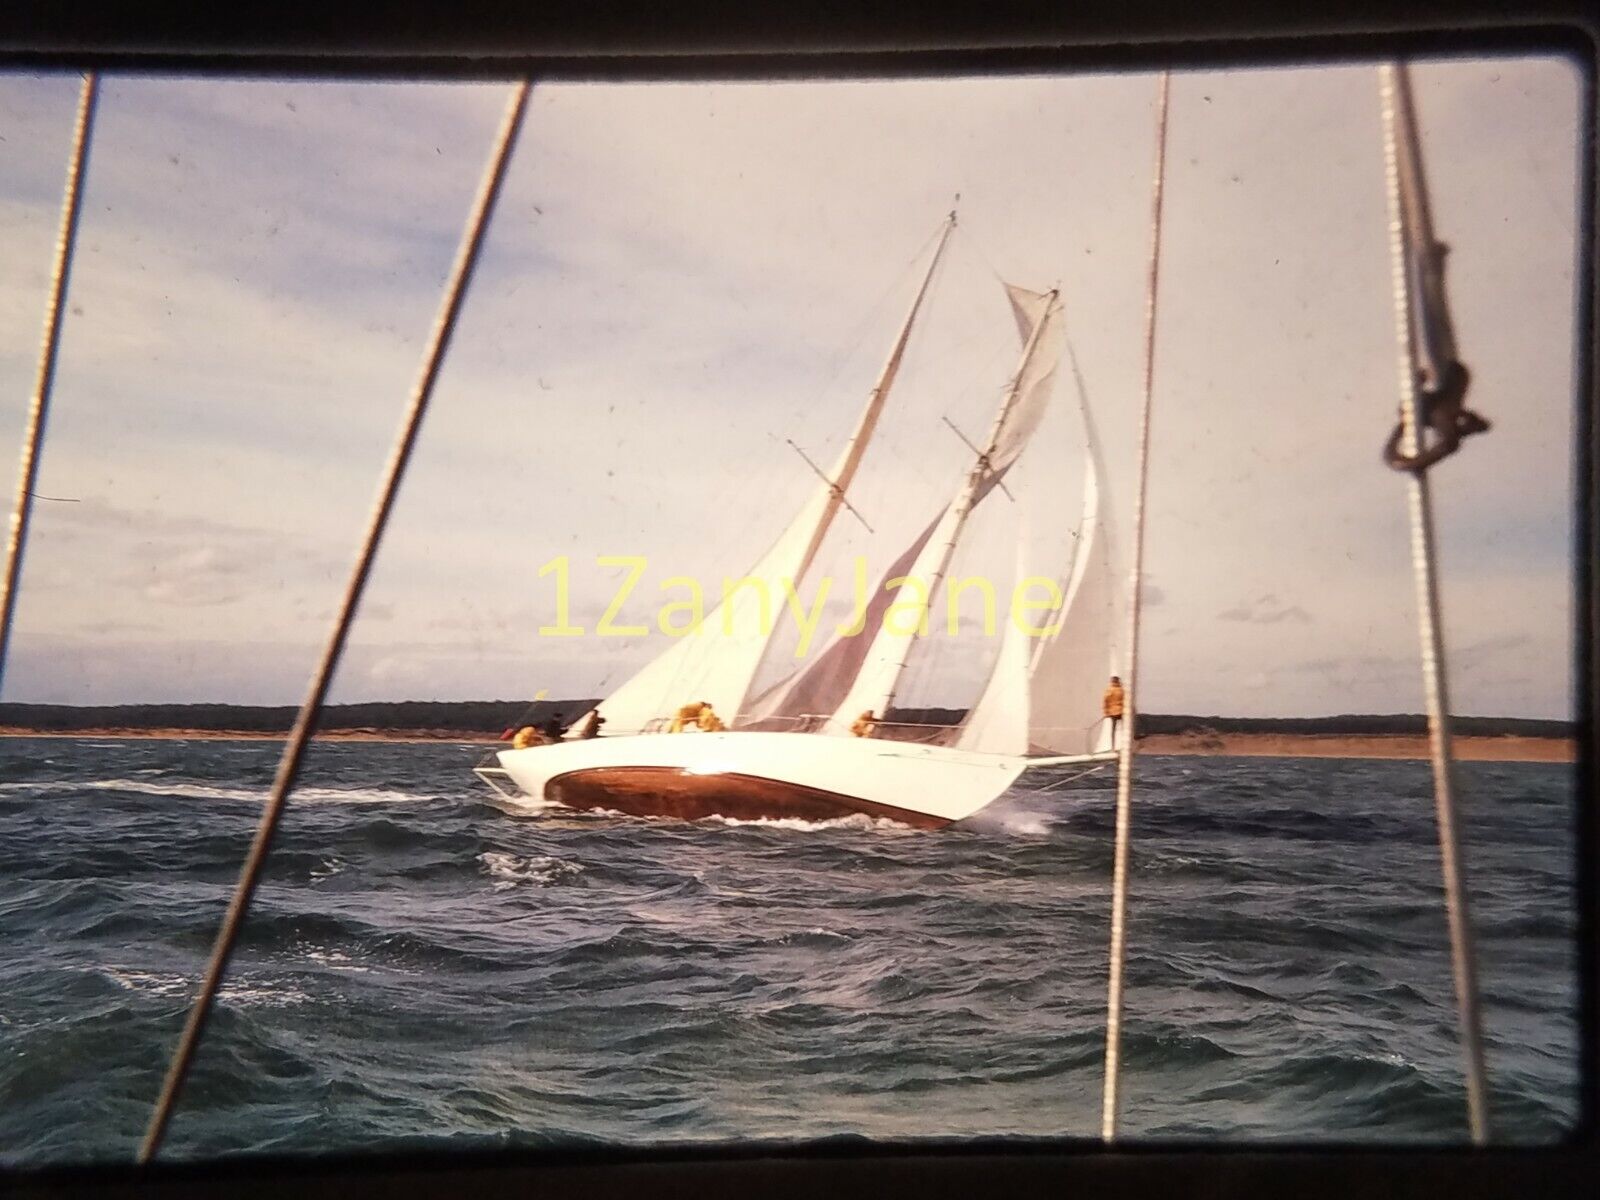 PZ12 Vintage 35MM SLIDE Photo SAILBOAT WITH SAILS FULL, AT 45 DEGREE ANGLE